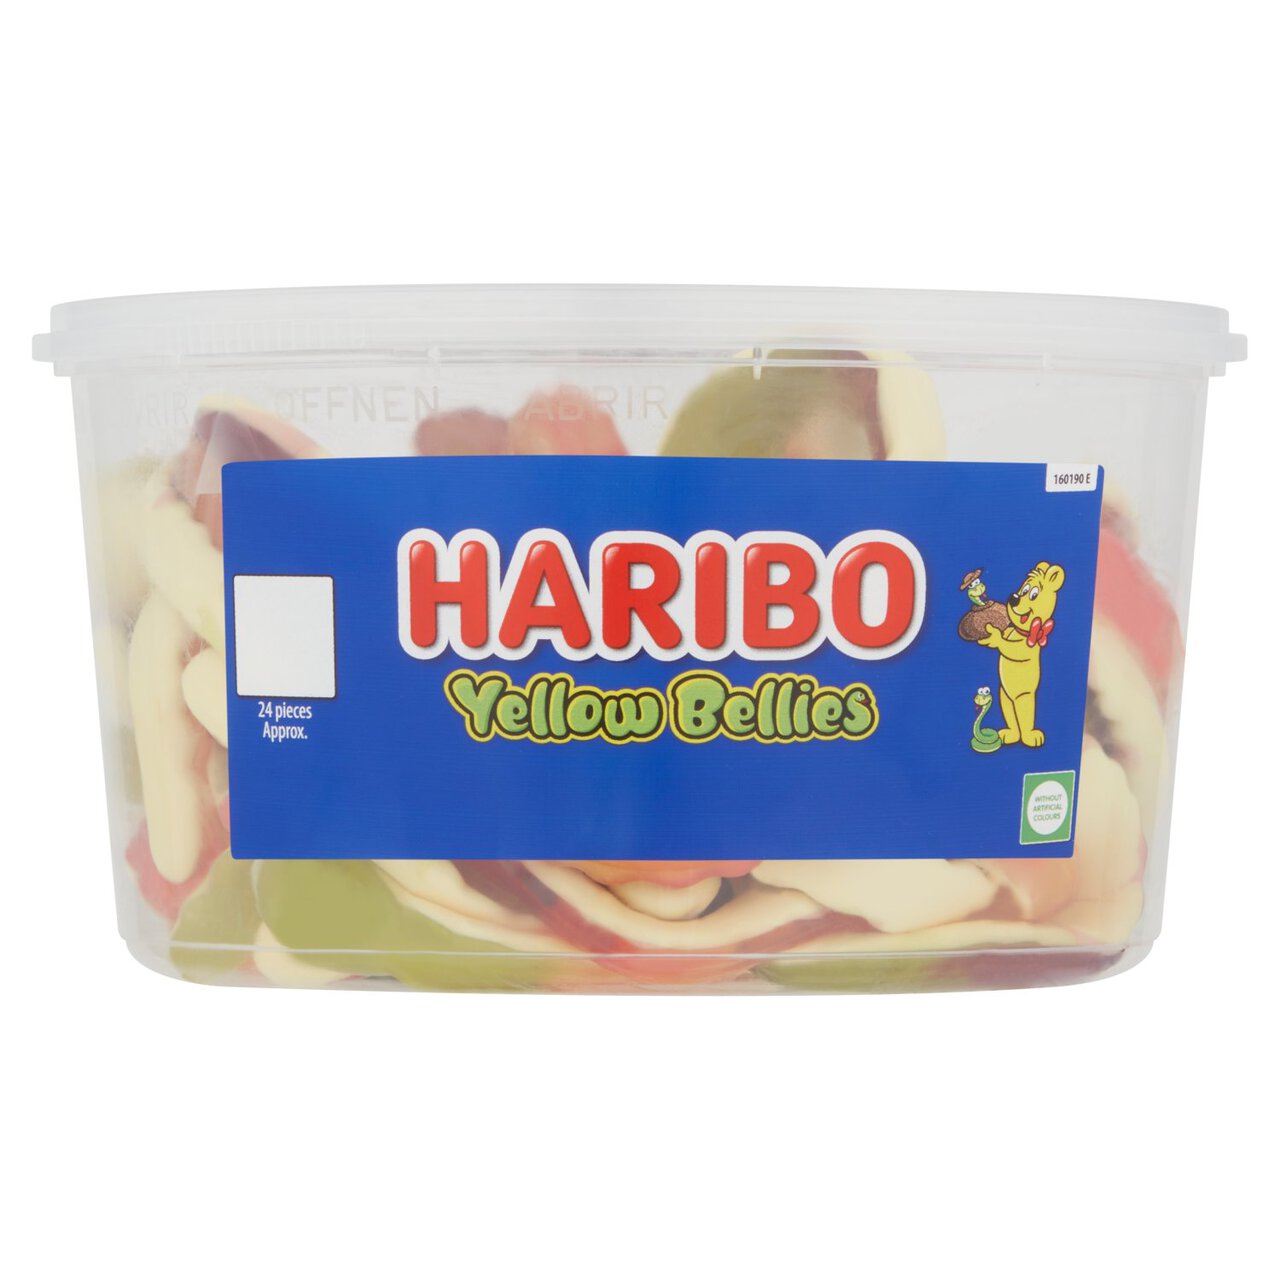 Haribo Yellow Bellies Giant Snakes Sweets Tub 768g